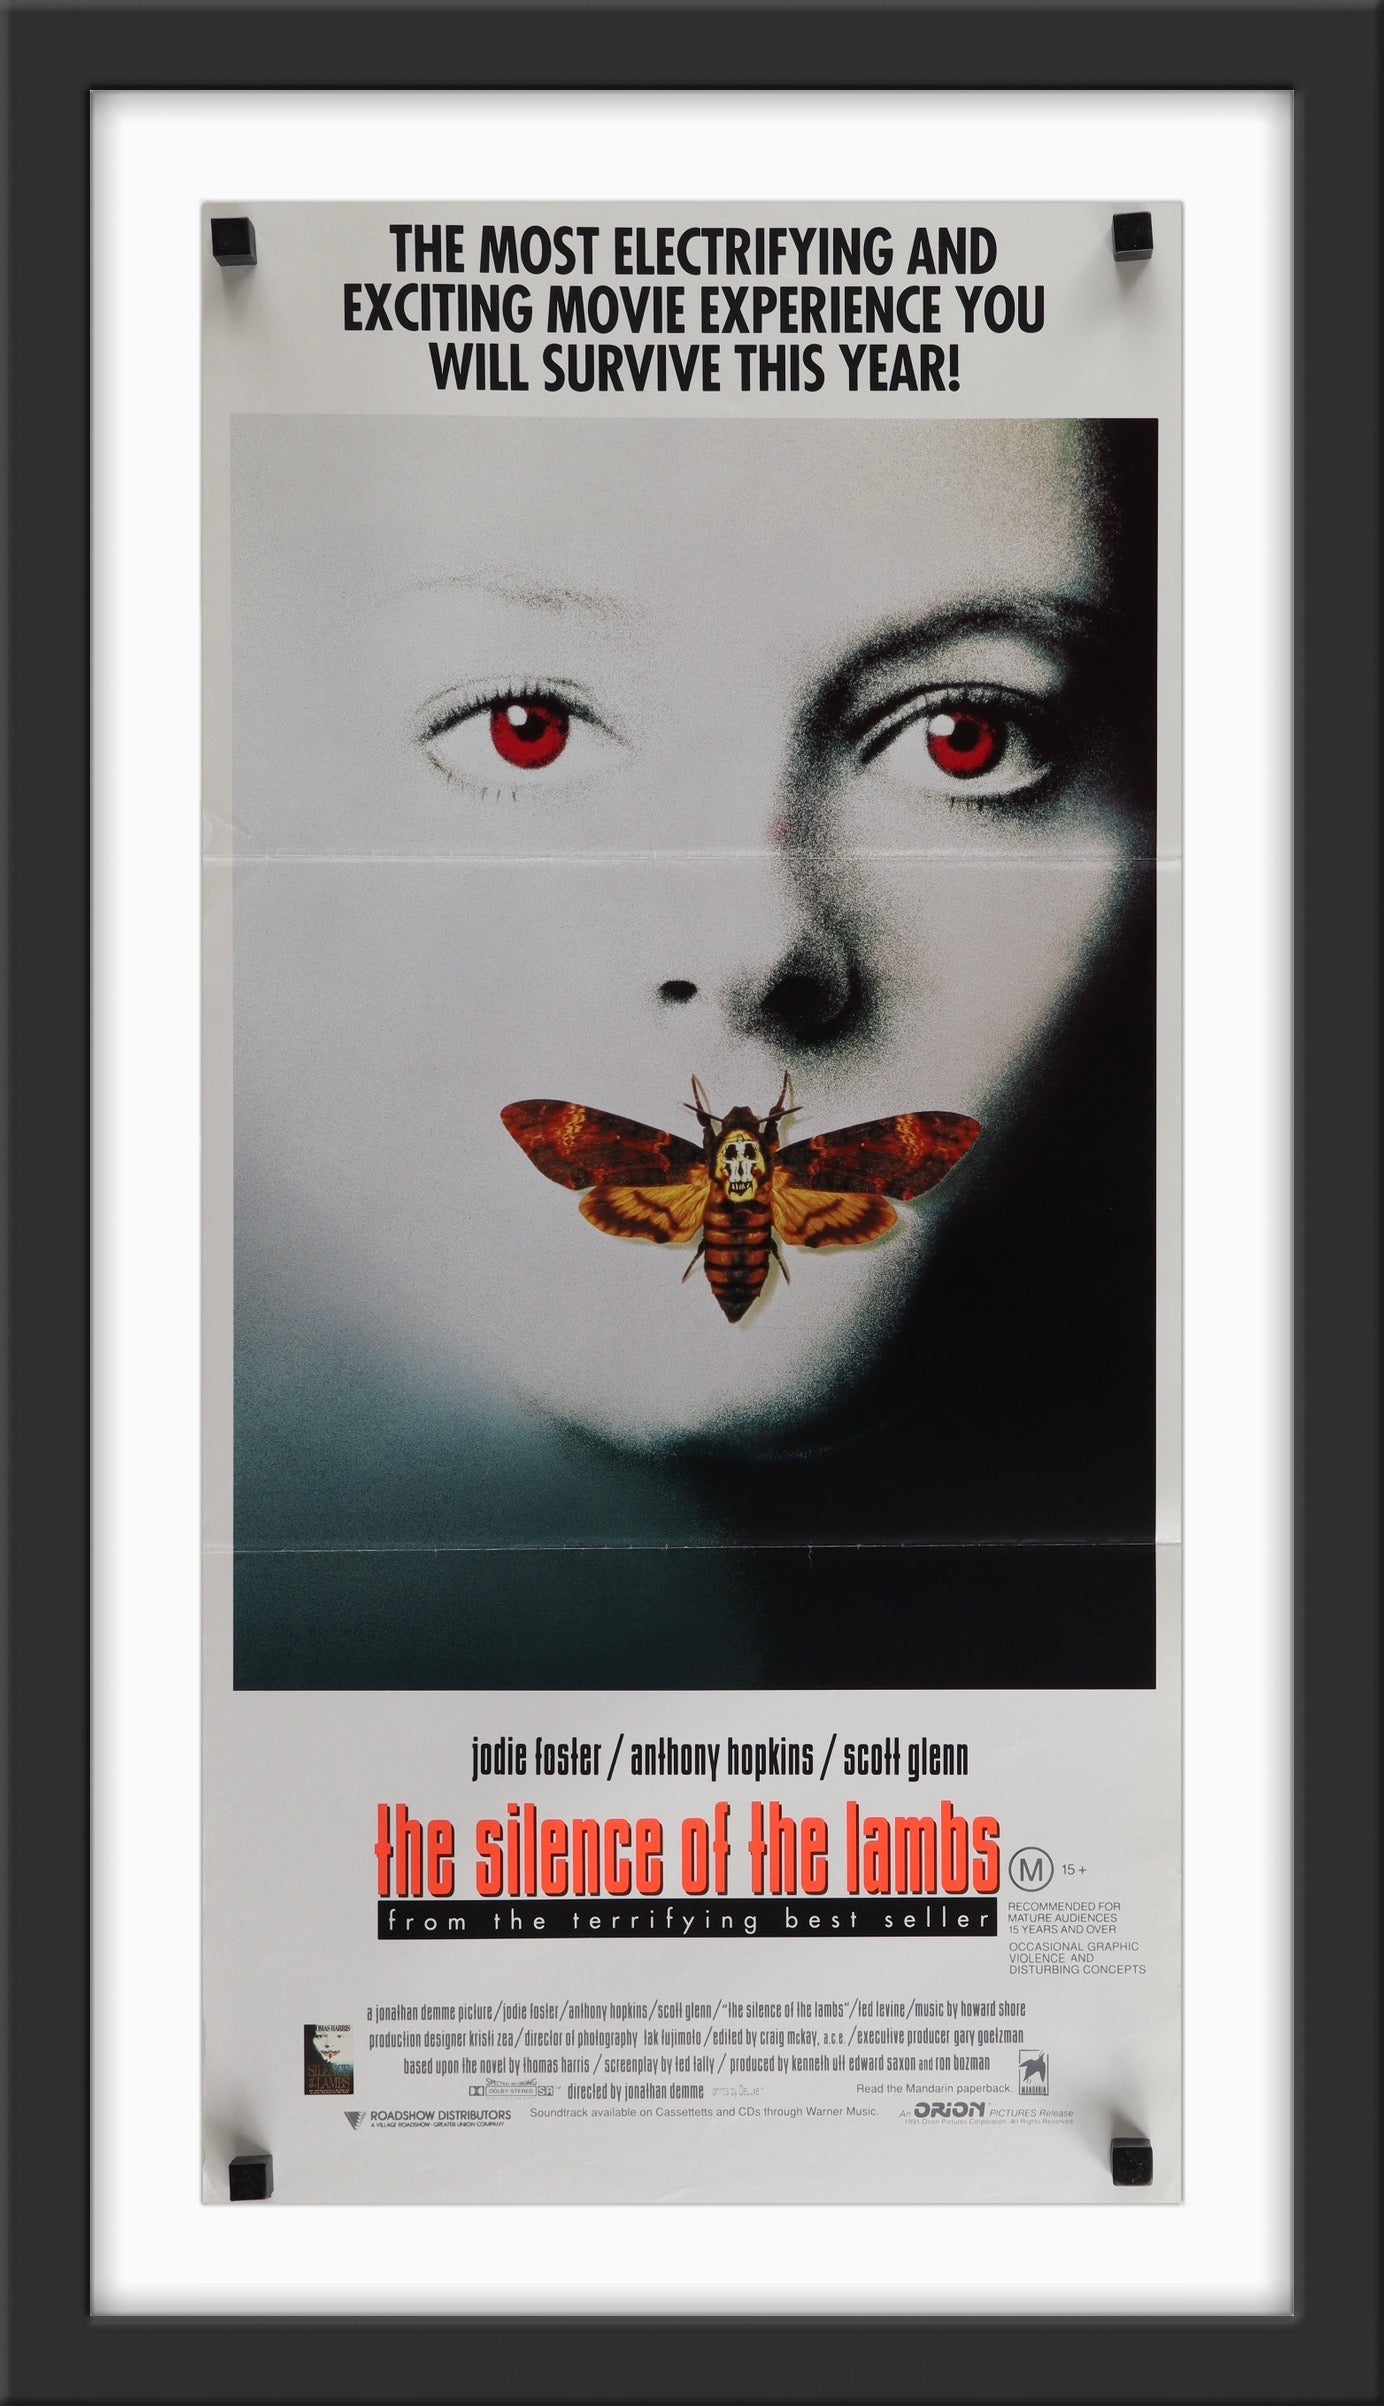 An original Australian Daybill movie poster for the film Silence of the Lambs